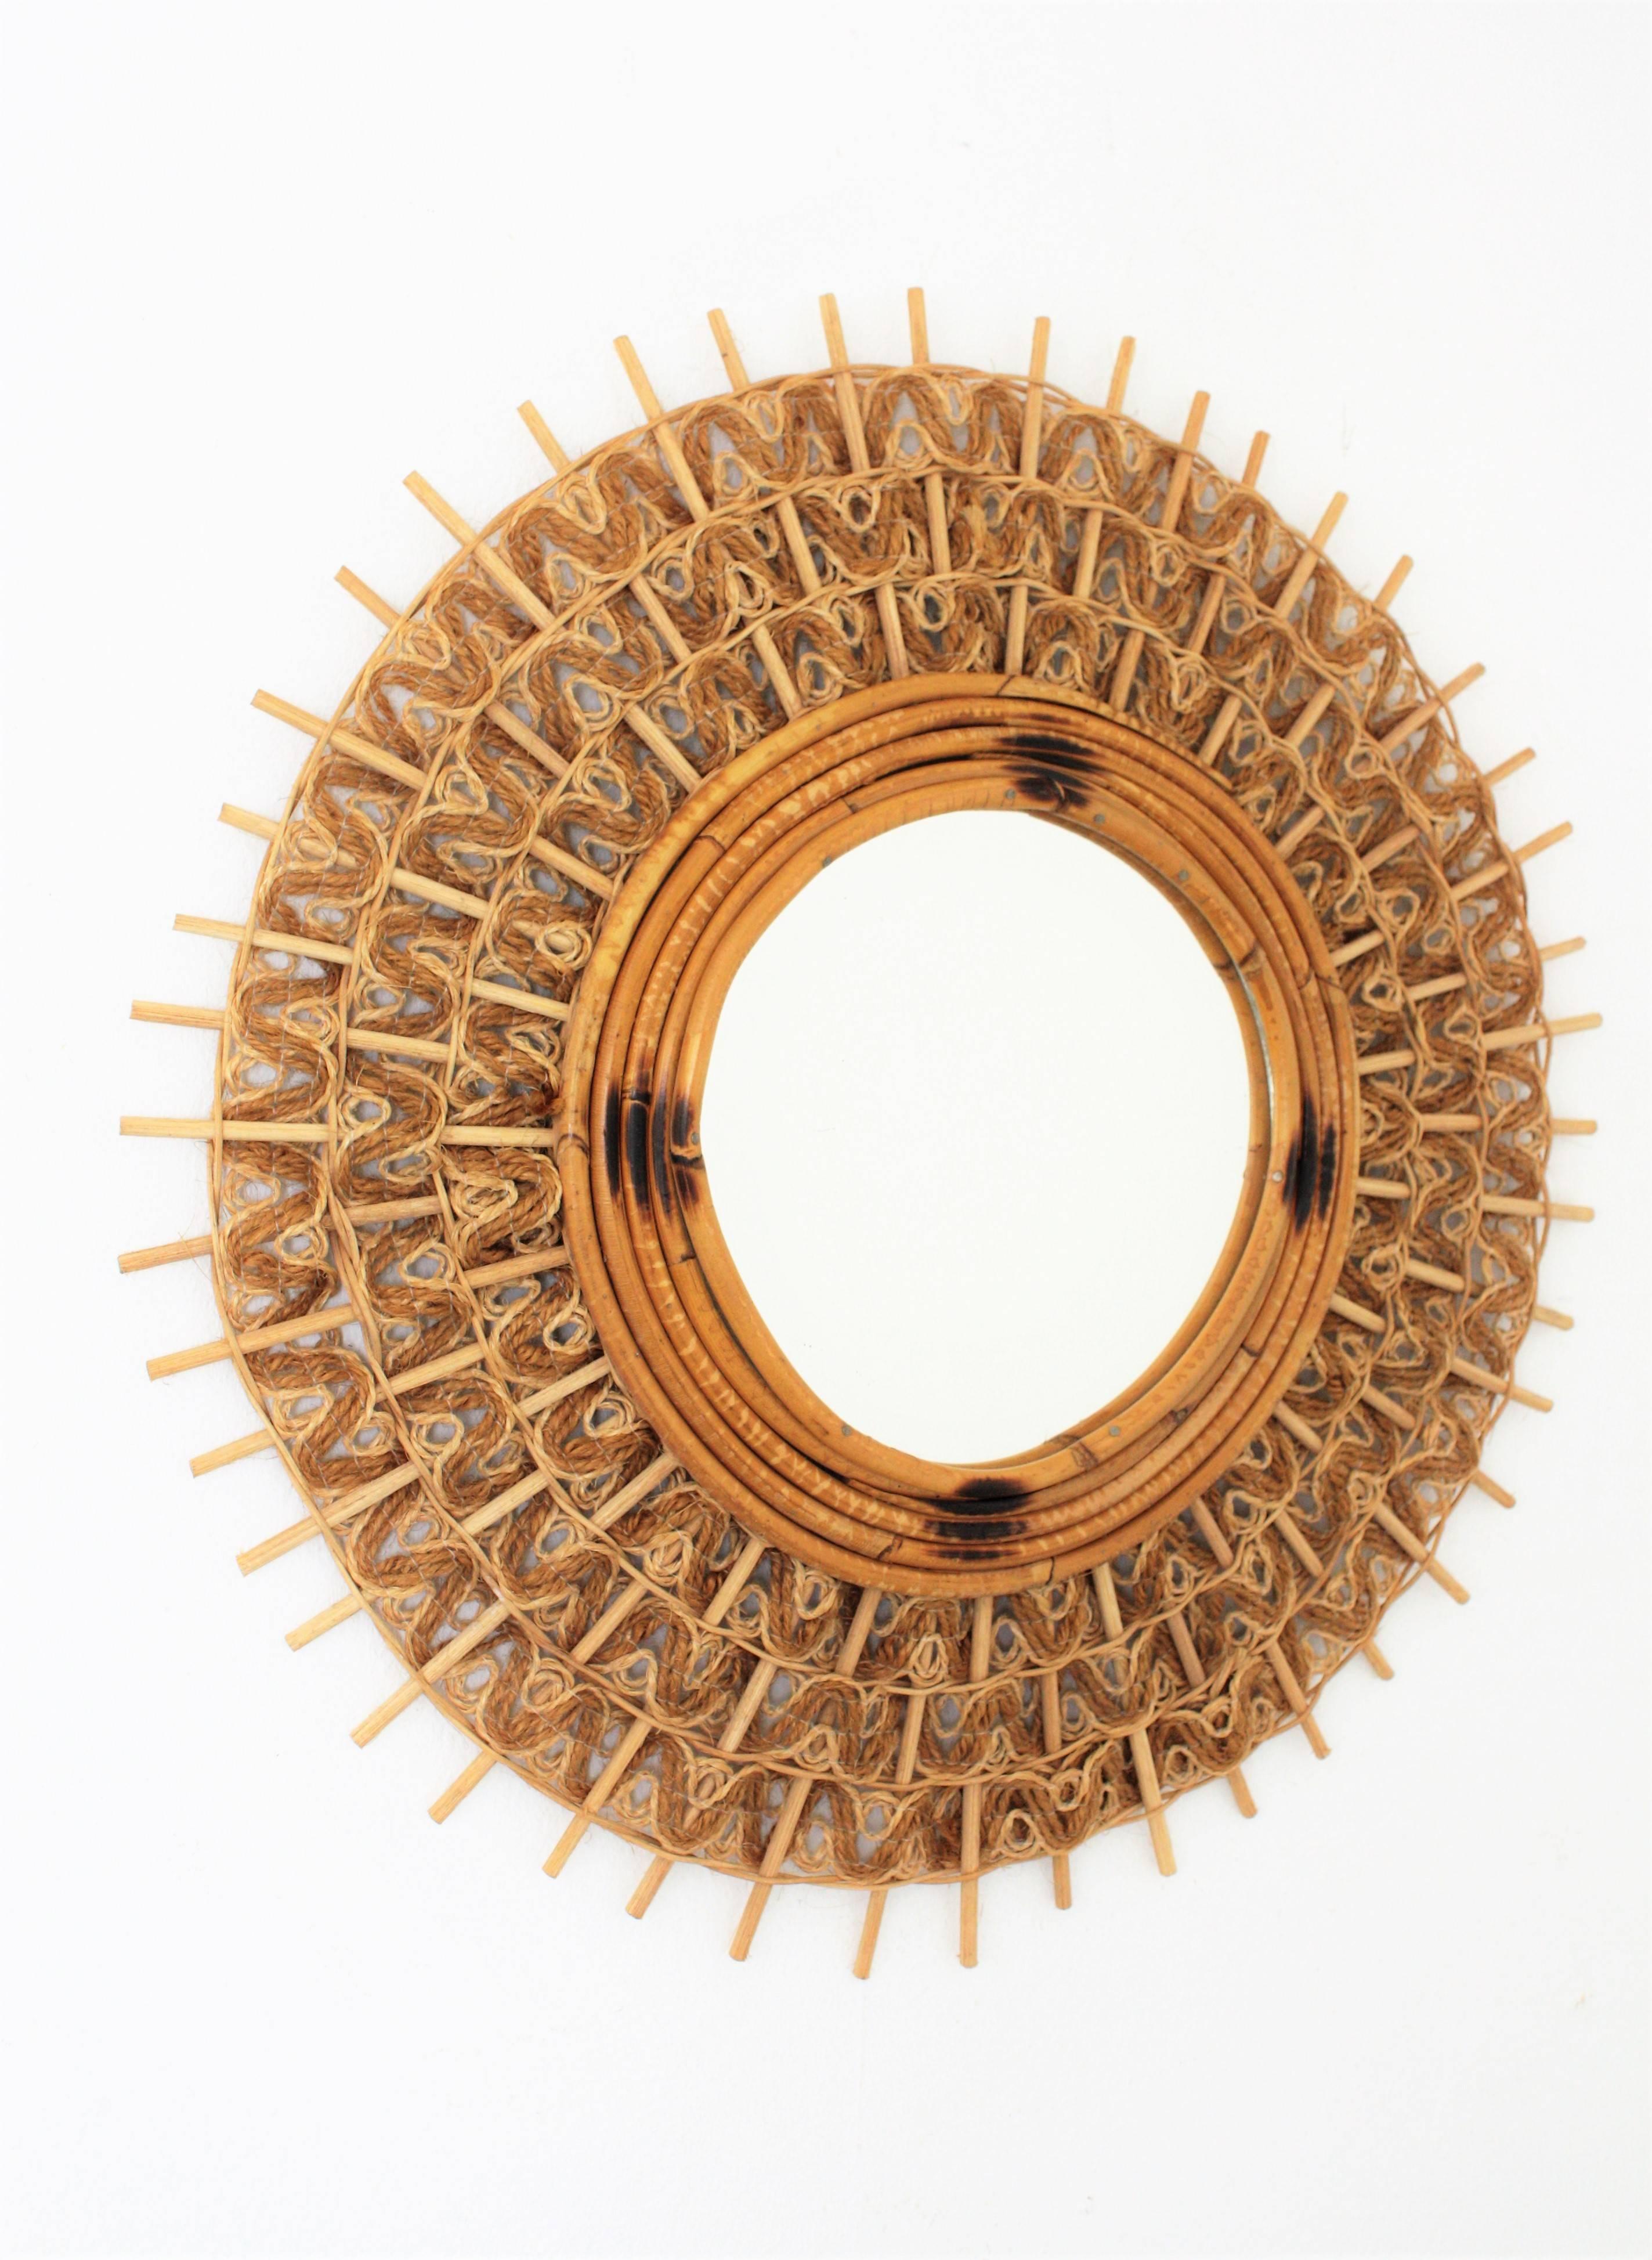 Unusual handcrafted two tones woven jute and rattan/ wicker circular sunburst mirror. The jute rope braided design combining two tones makes this piece highly decorative. Beautiful to place alone or combined with other mirrors in the manner creating